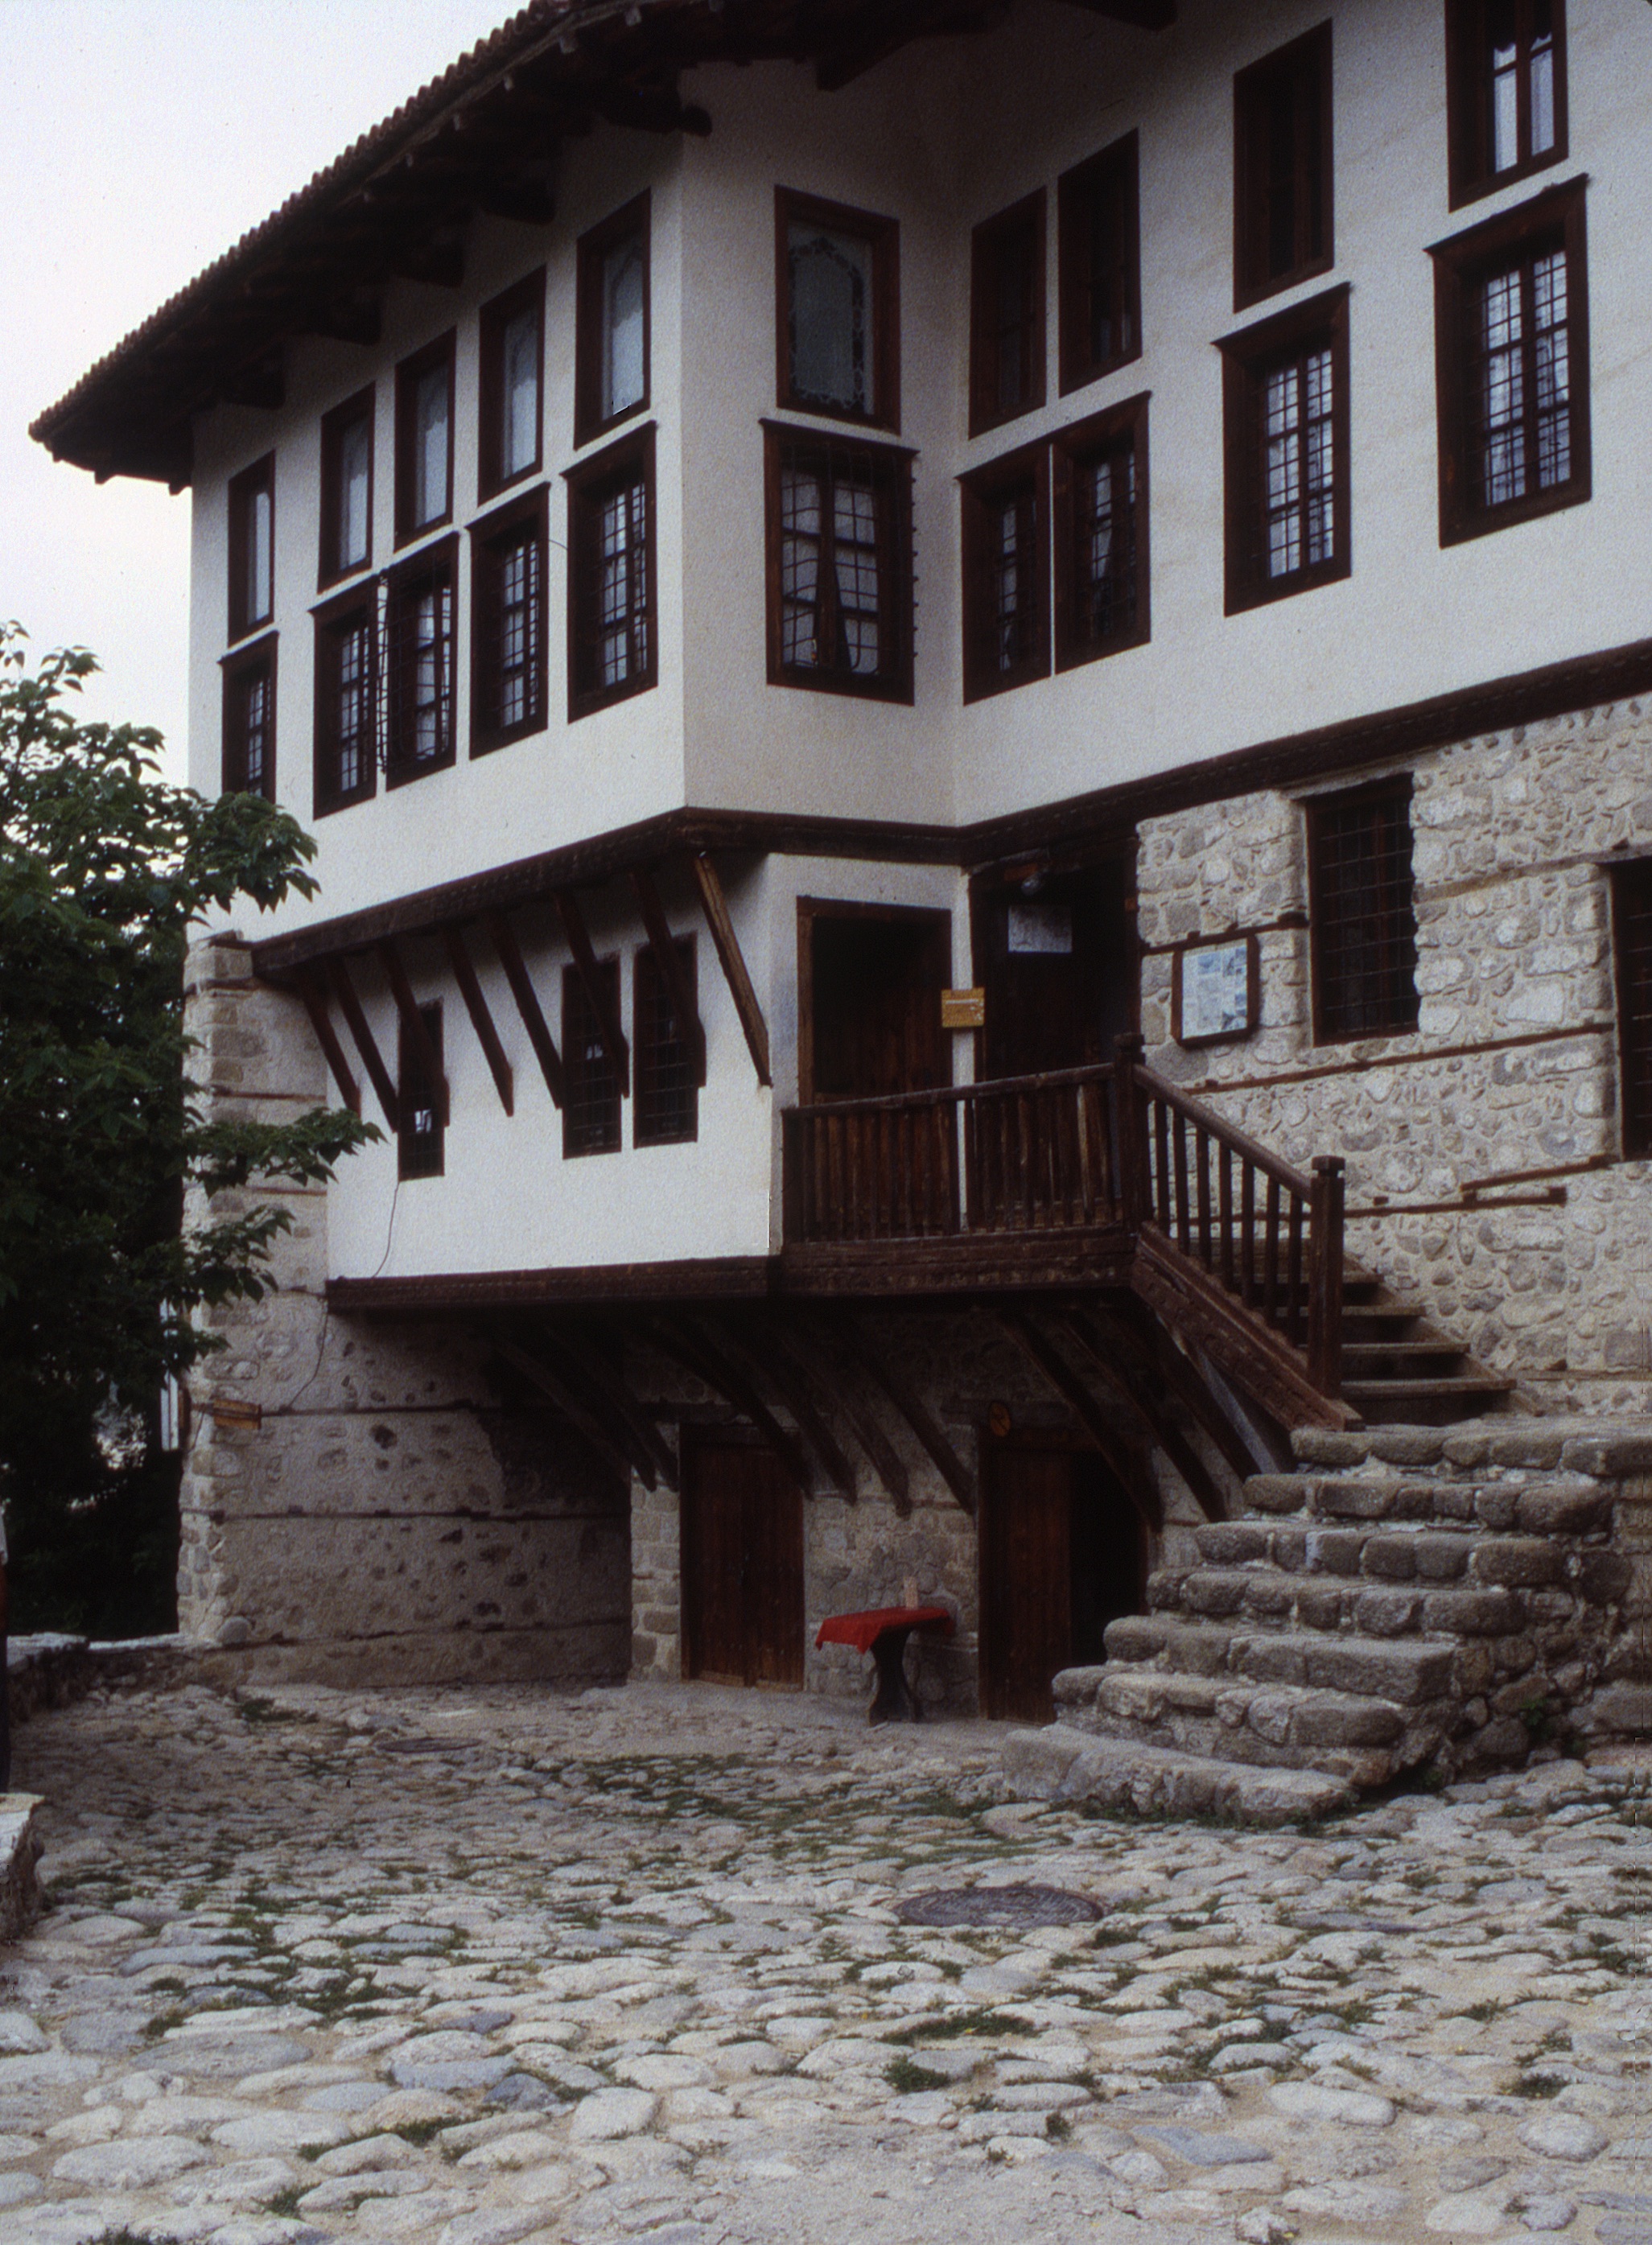 <p>The dwelling complex is designated as a historic object and currently serves as a museum. The covered area next to the stone wall at the left is a passage that leads to a gateway beyond. The ownership of the house passed from the Kordopoulos family to the Tsintsarov family and so is also known as the Tsintsarovata kăšta. The doubled windows on the upper floor are a feature of Greek Macedonian architecture, seldom found elsewhere in Bulgaria. Under the dwelling are caves and formed ventilated cellars to allow for the proper fermentation and curing of wine.</p>